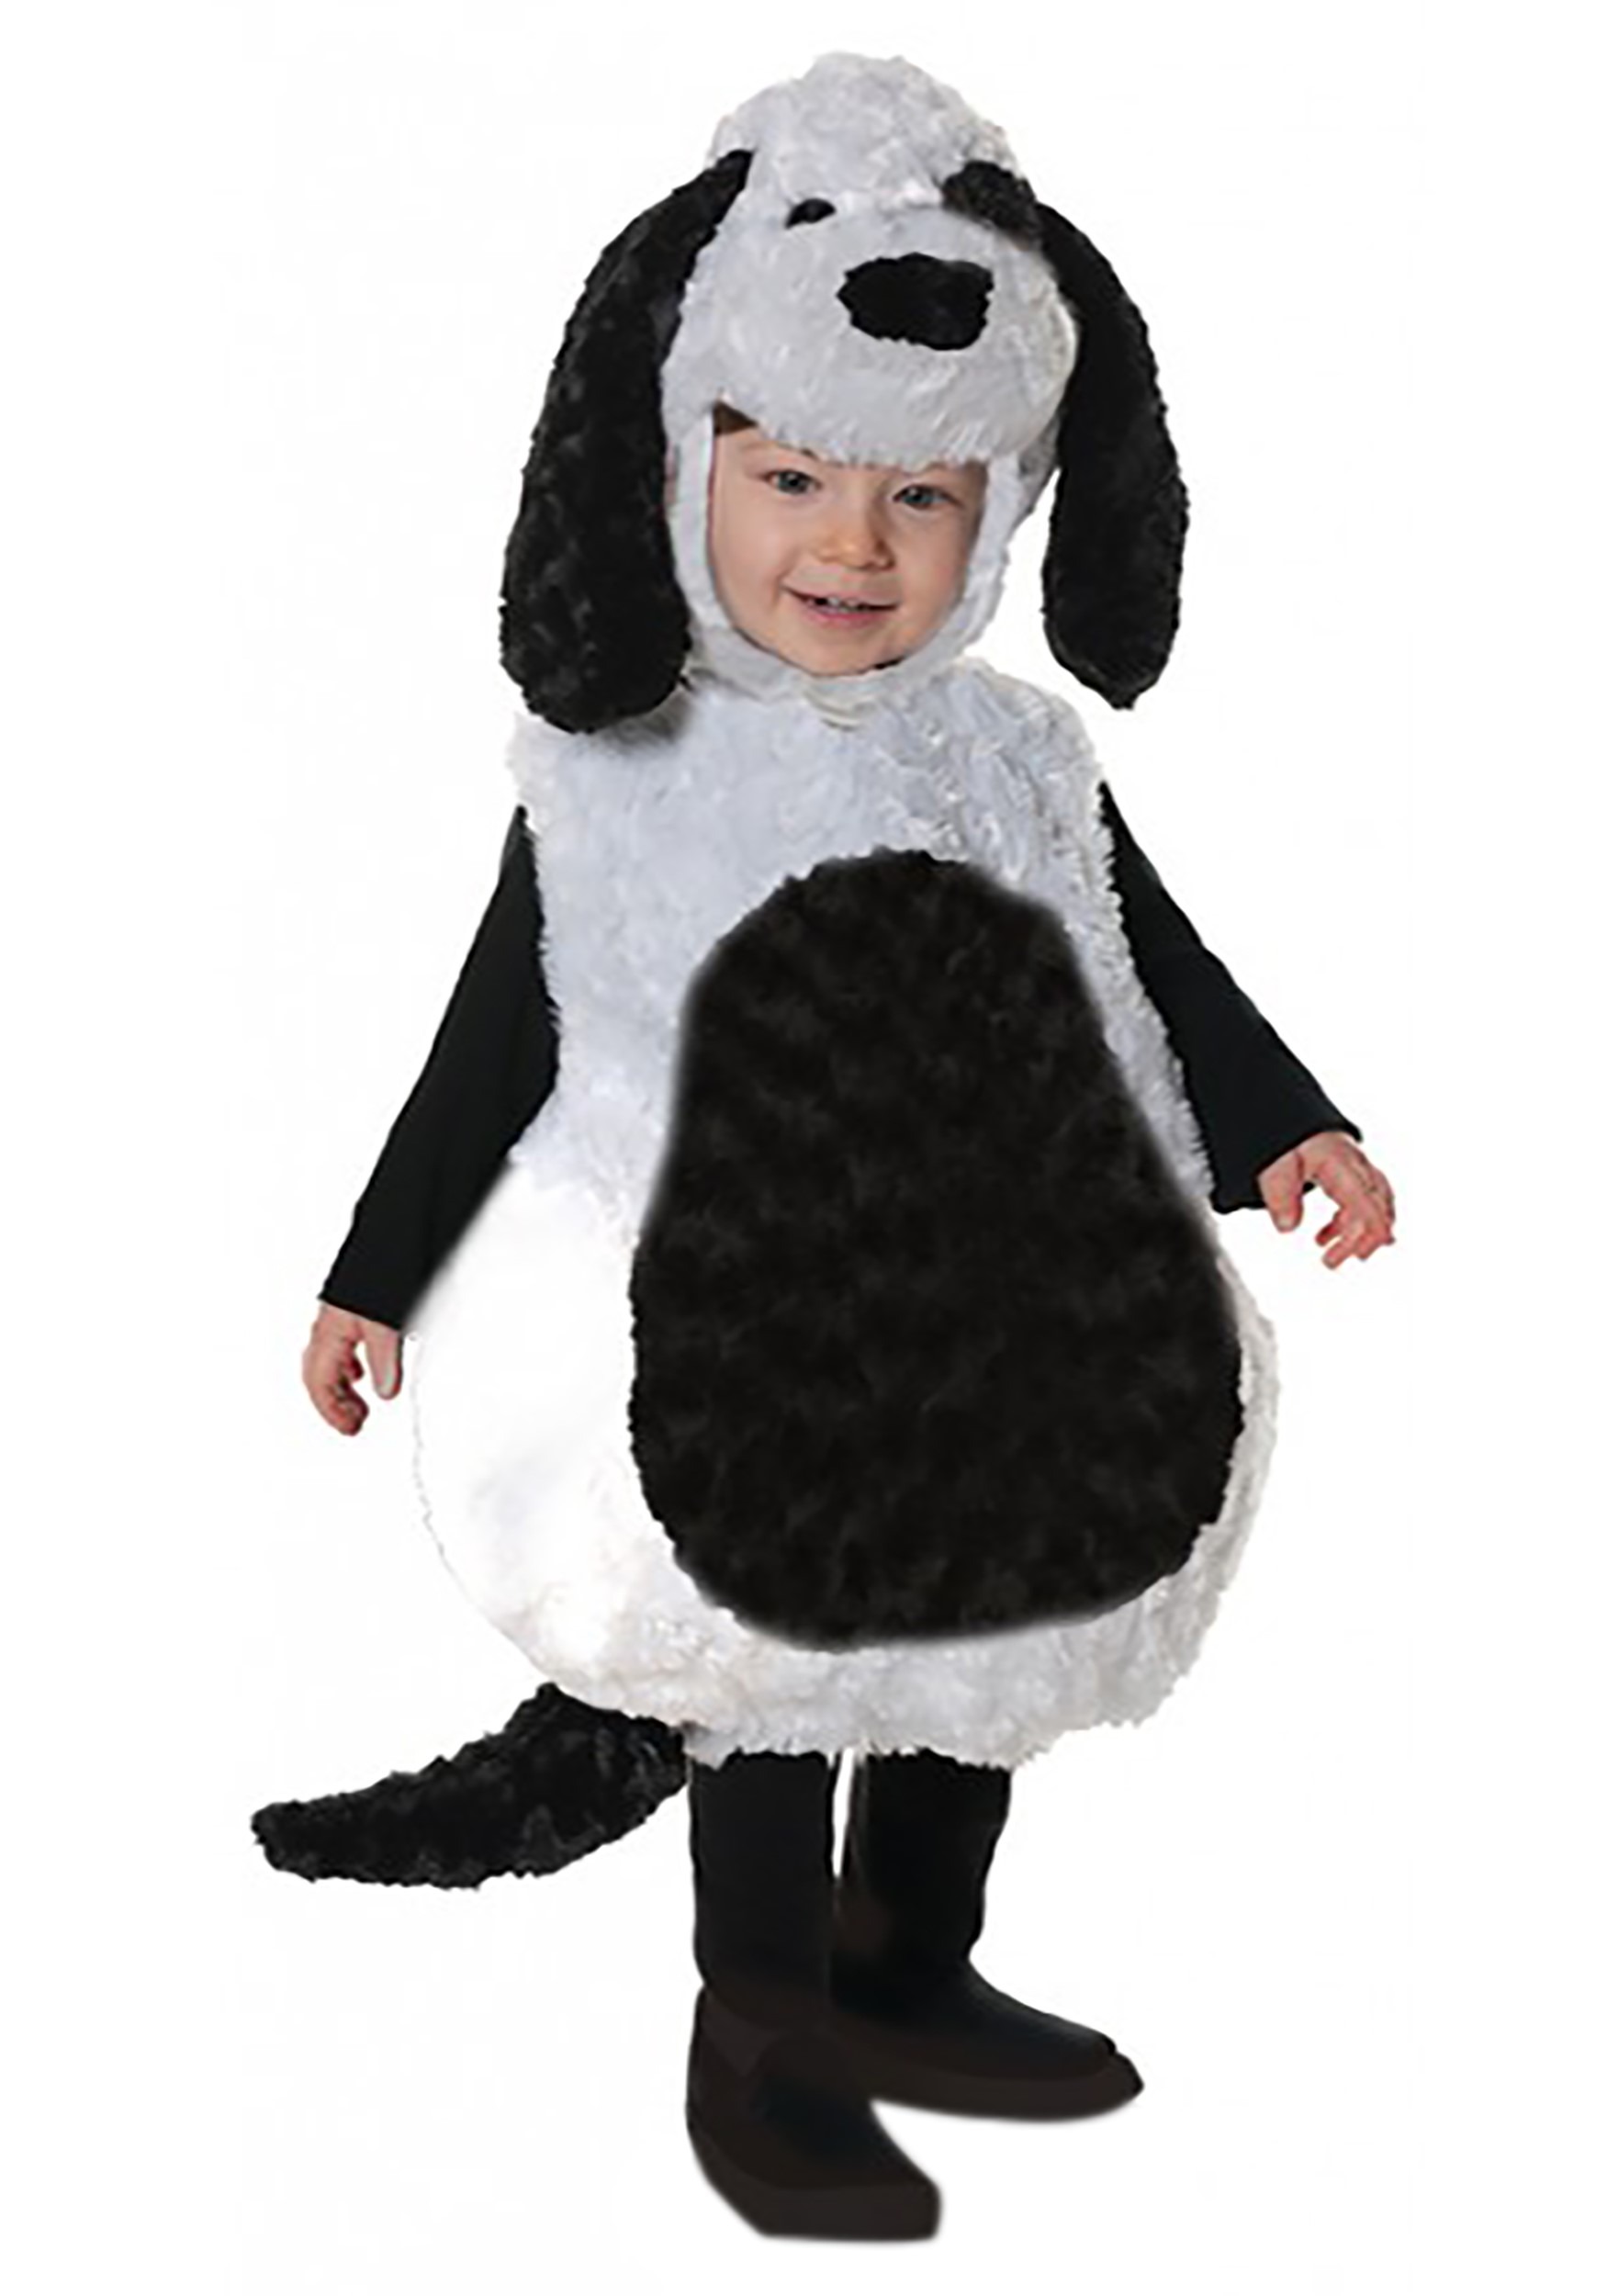 Bubble Lil’ Pup Costume for Kids